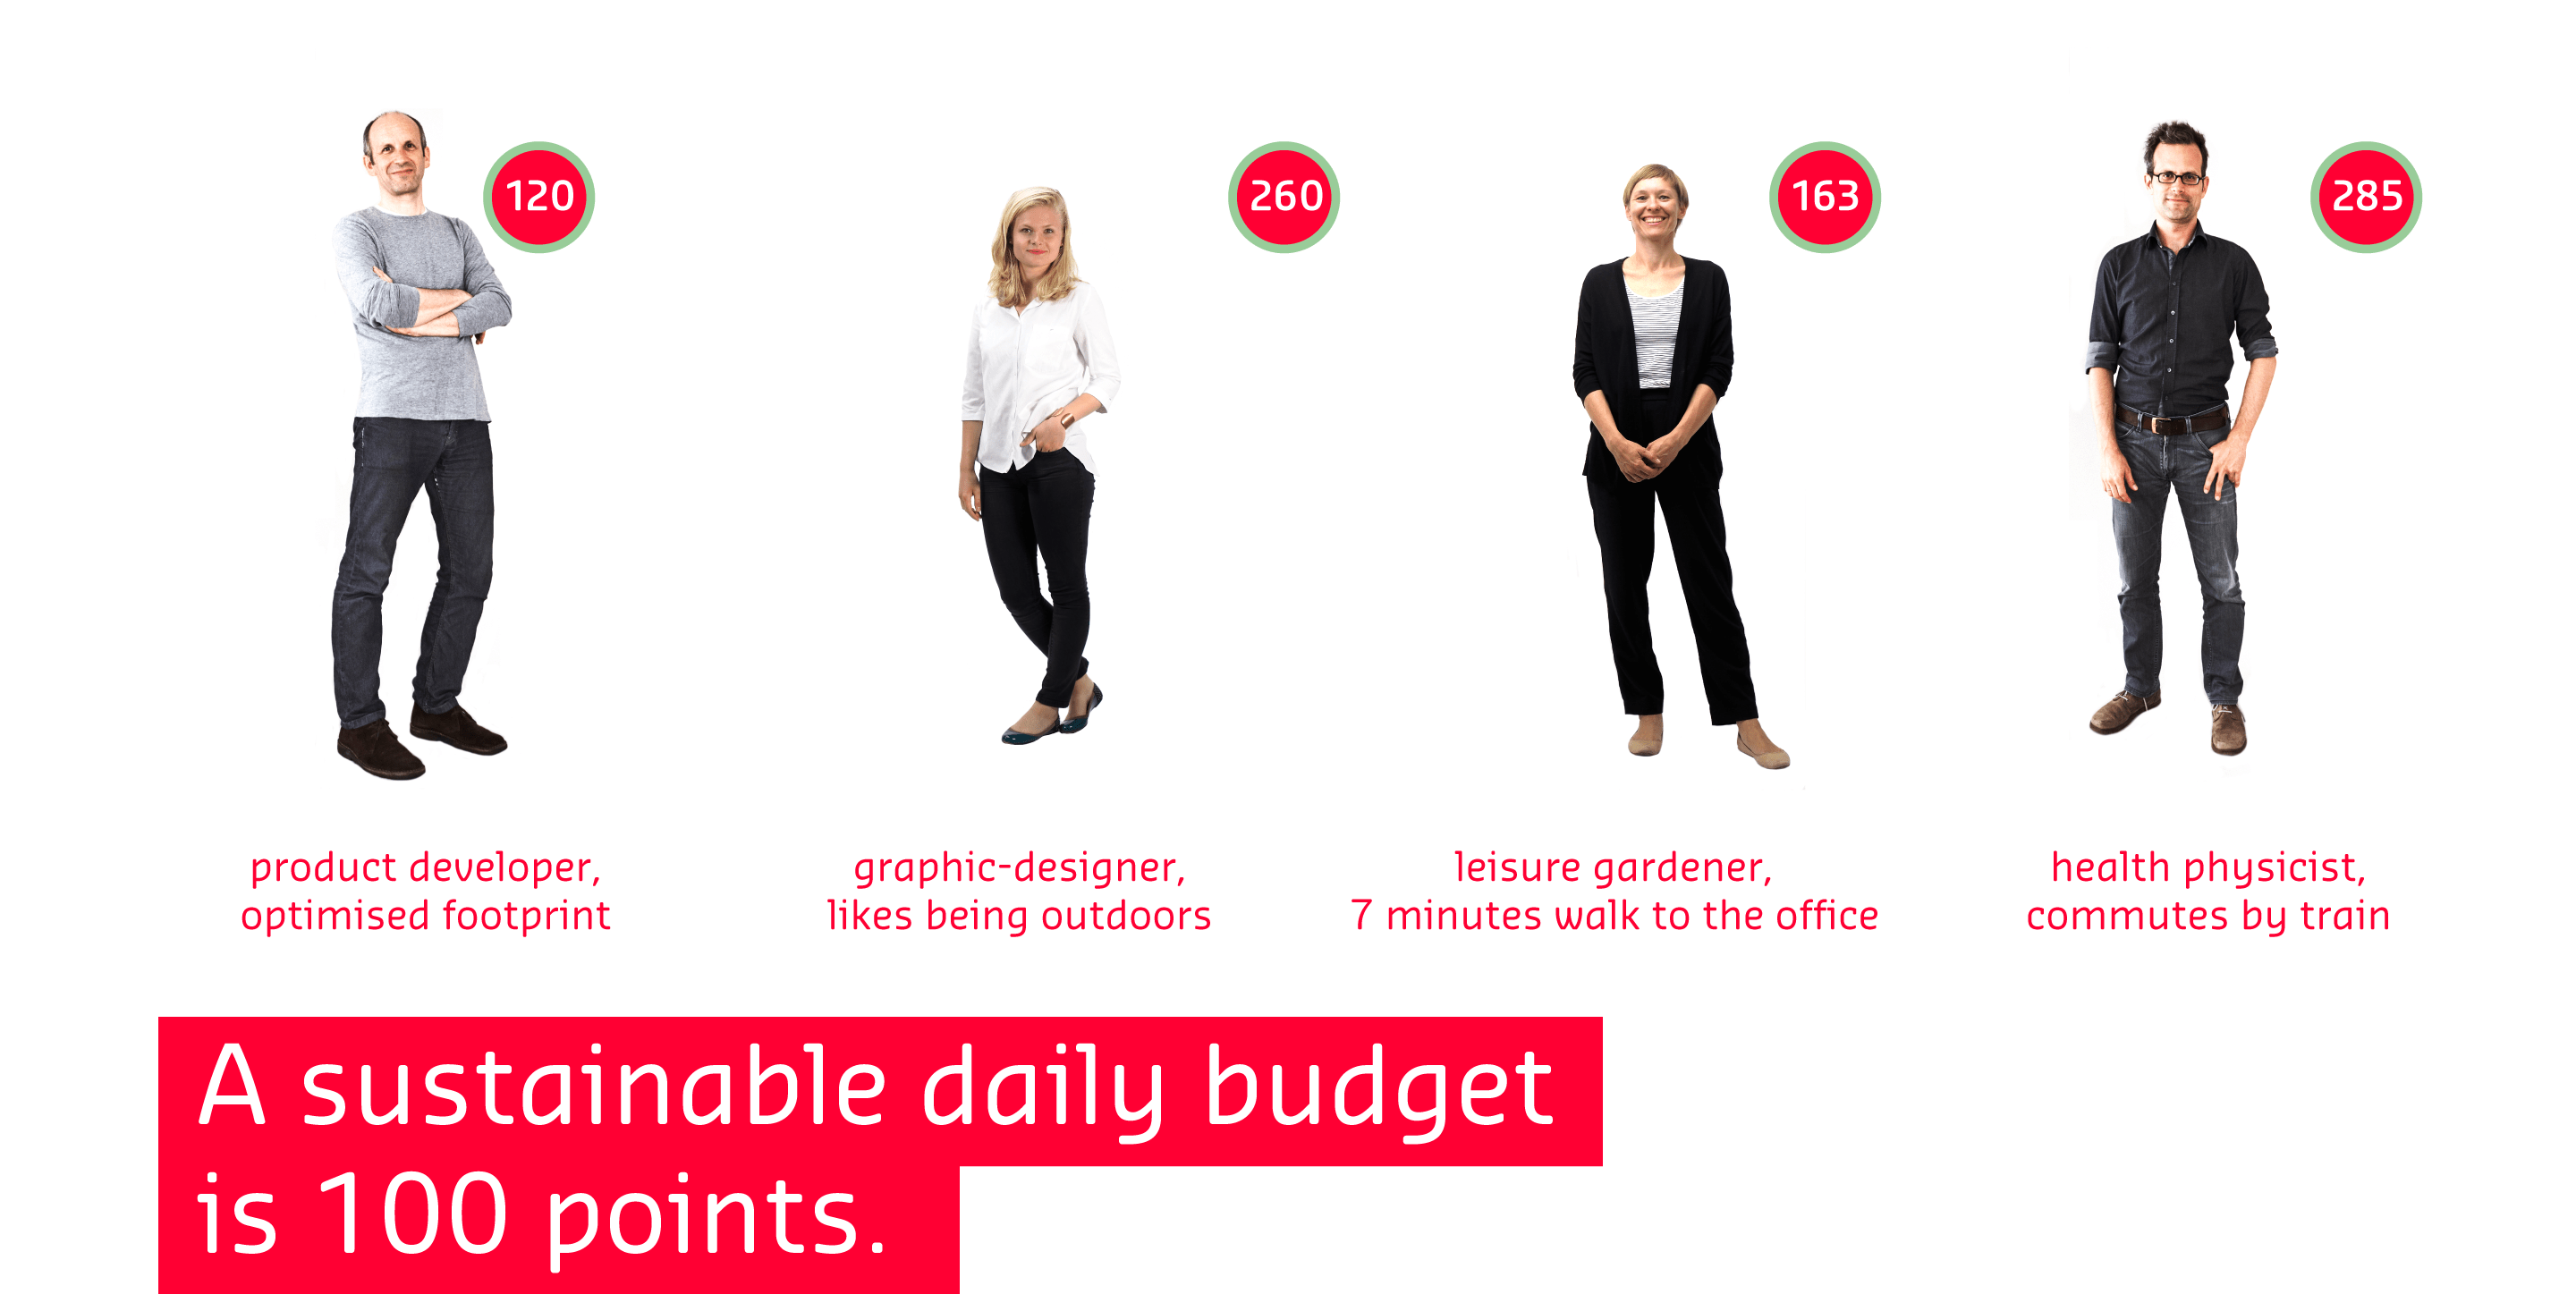 A sustainable daily budget is 100 points